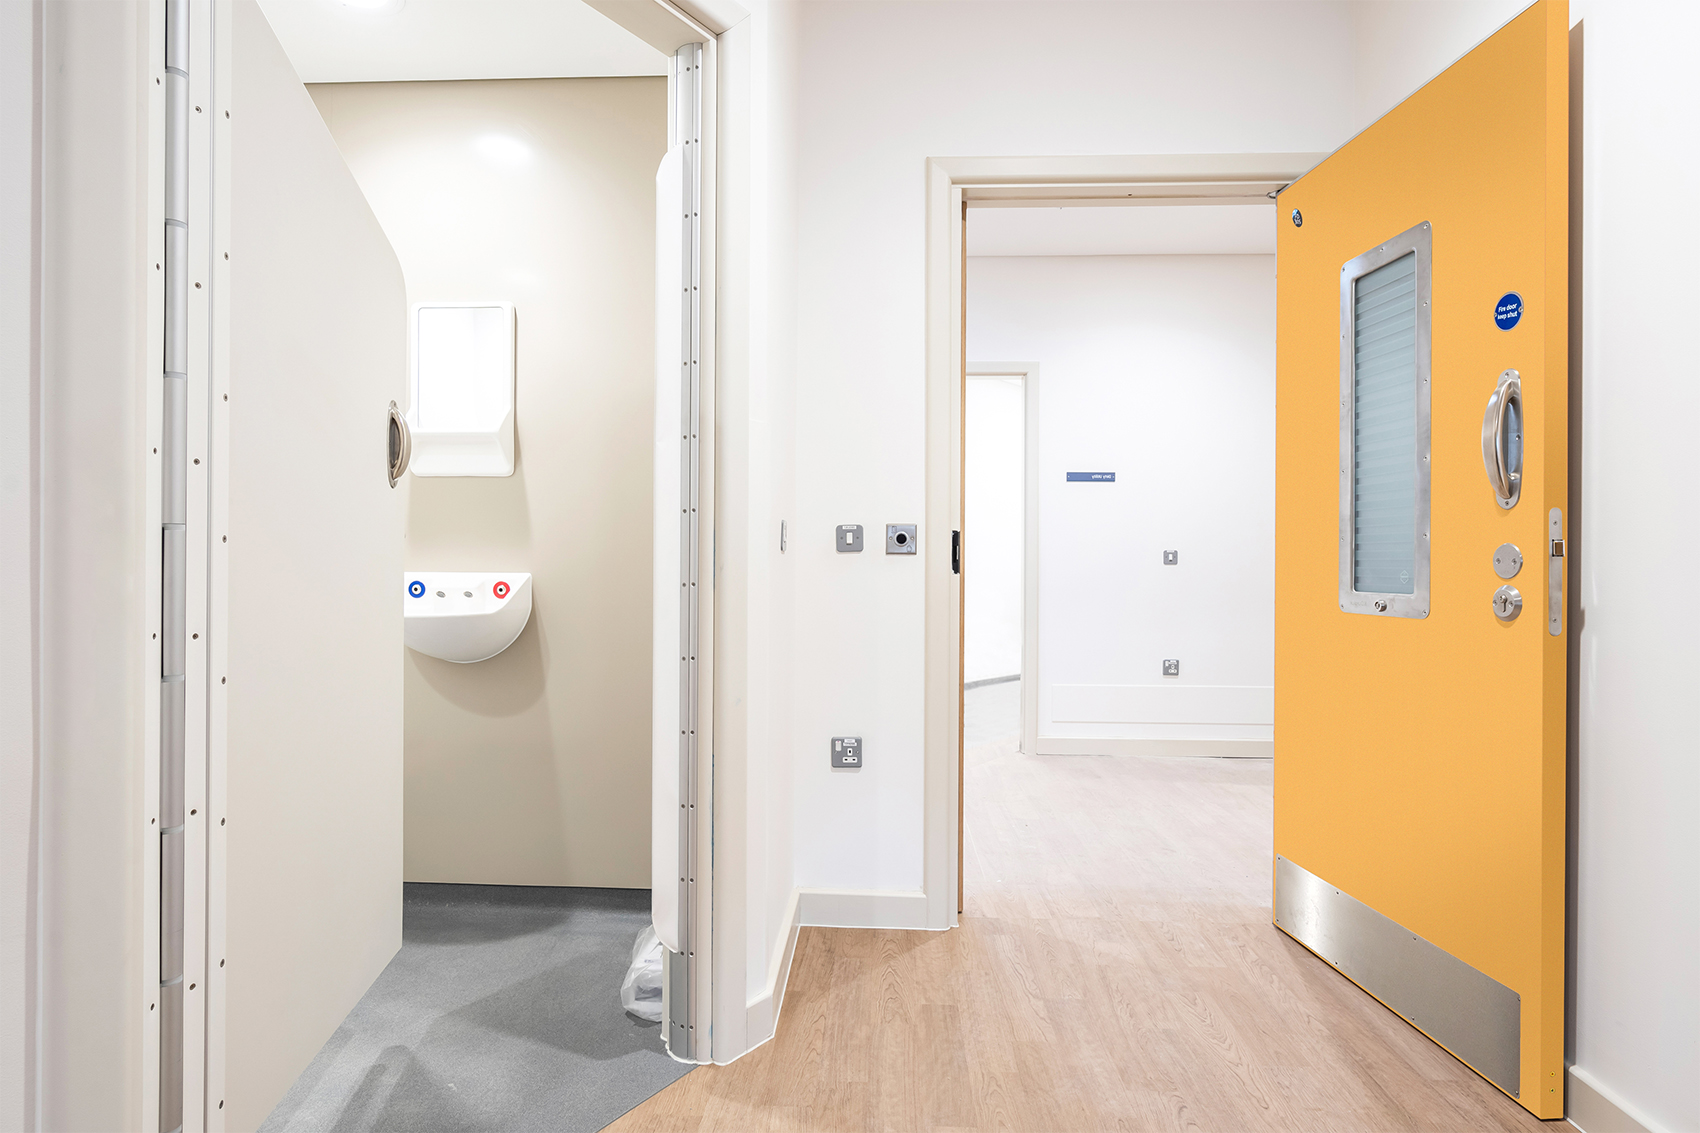 Anti-Ligature Products for Mental Health by Kingsway, designed to improve patient safety.